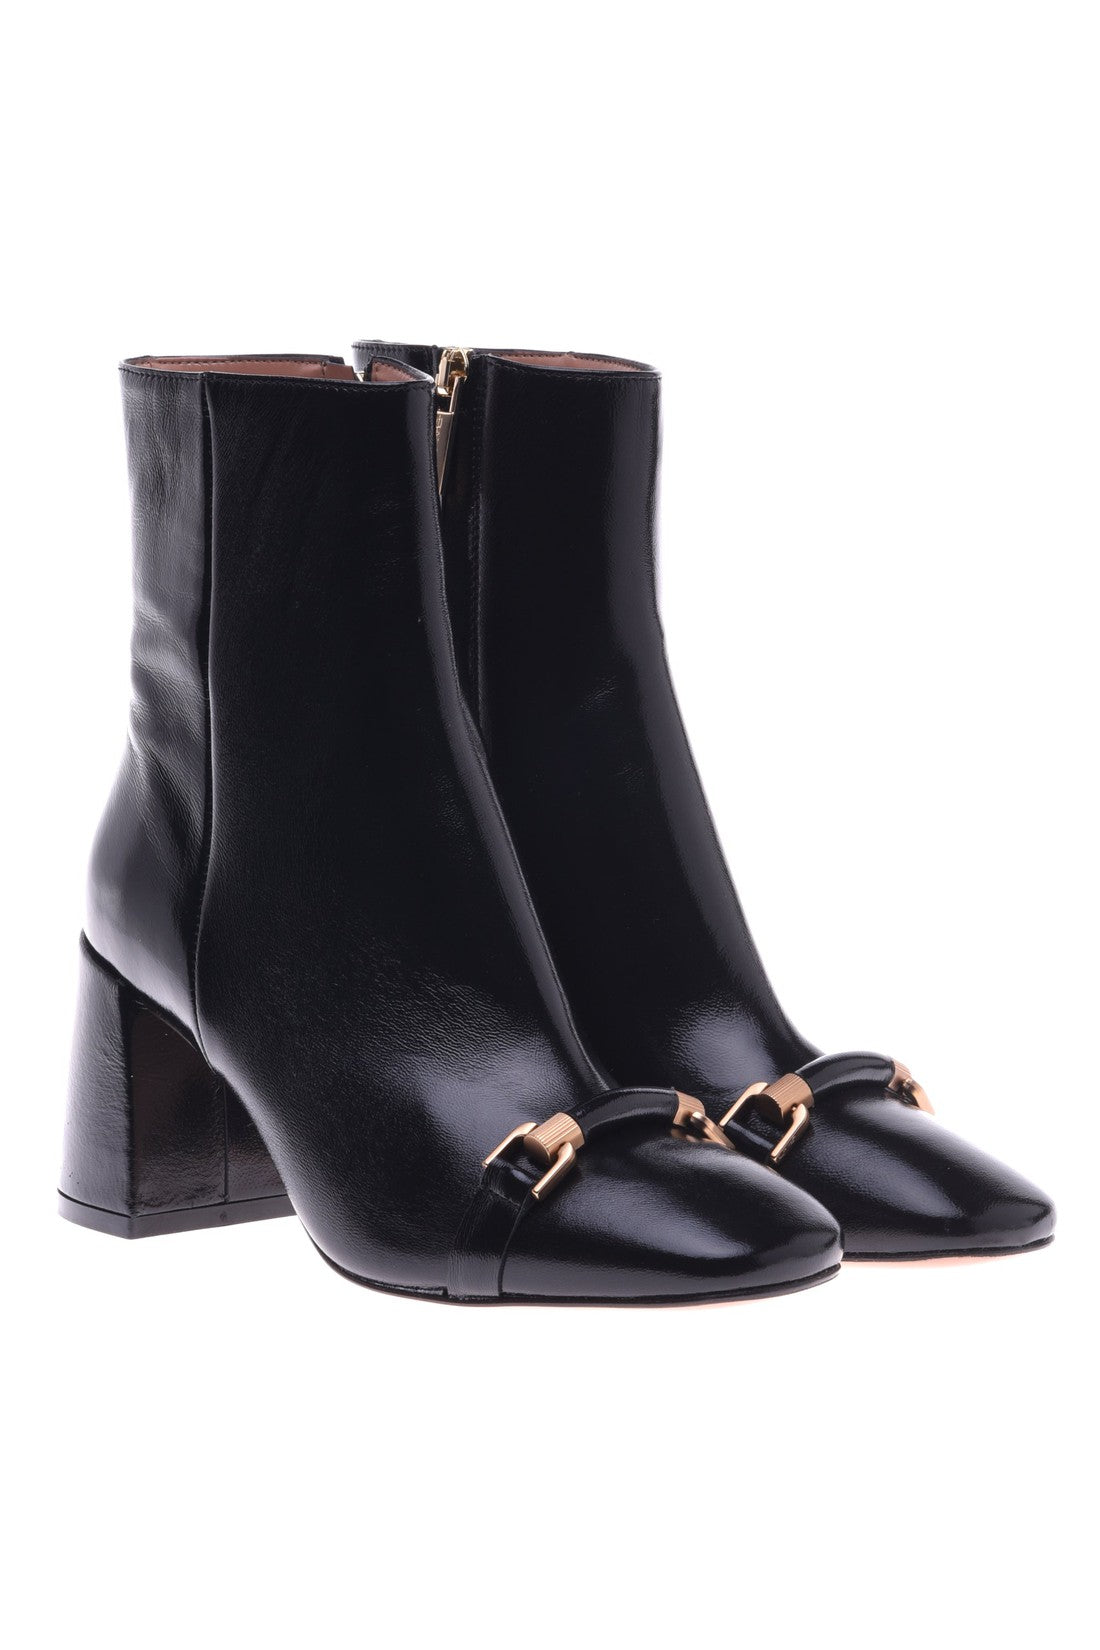 BALDININI-OUTLET-SALE-Ankle-boot-in-black-naplak-Stiefel-Stiefeletten-ARCHIVE-COLLECTION-3.jpg